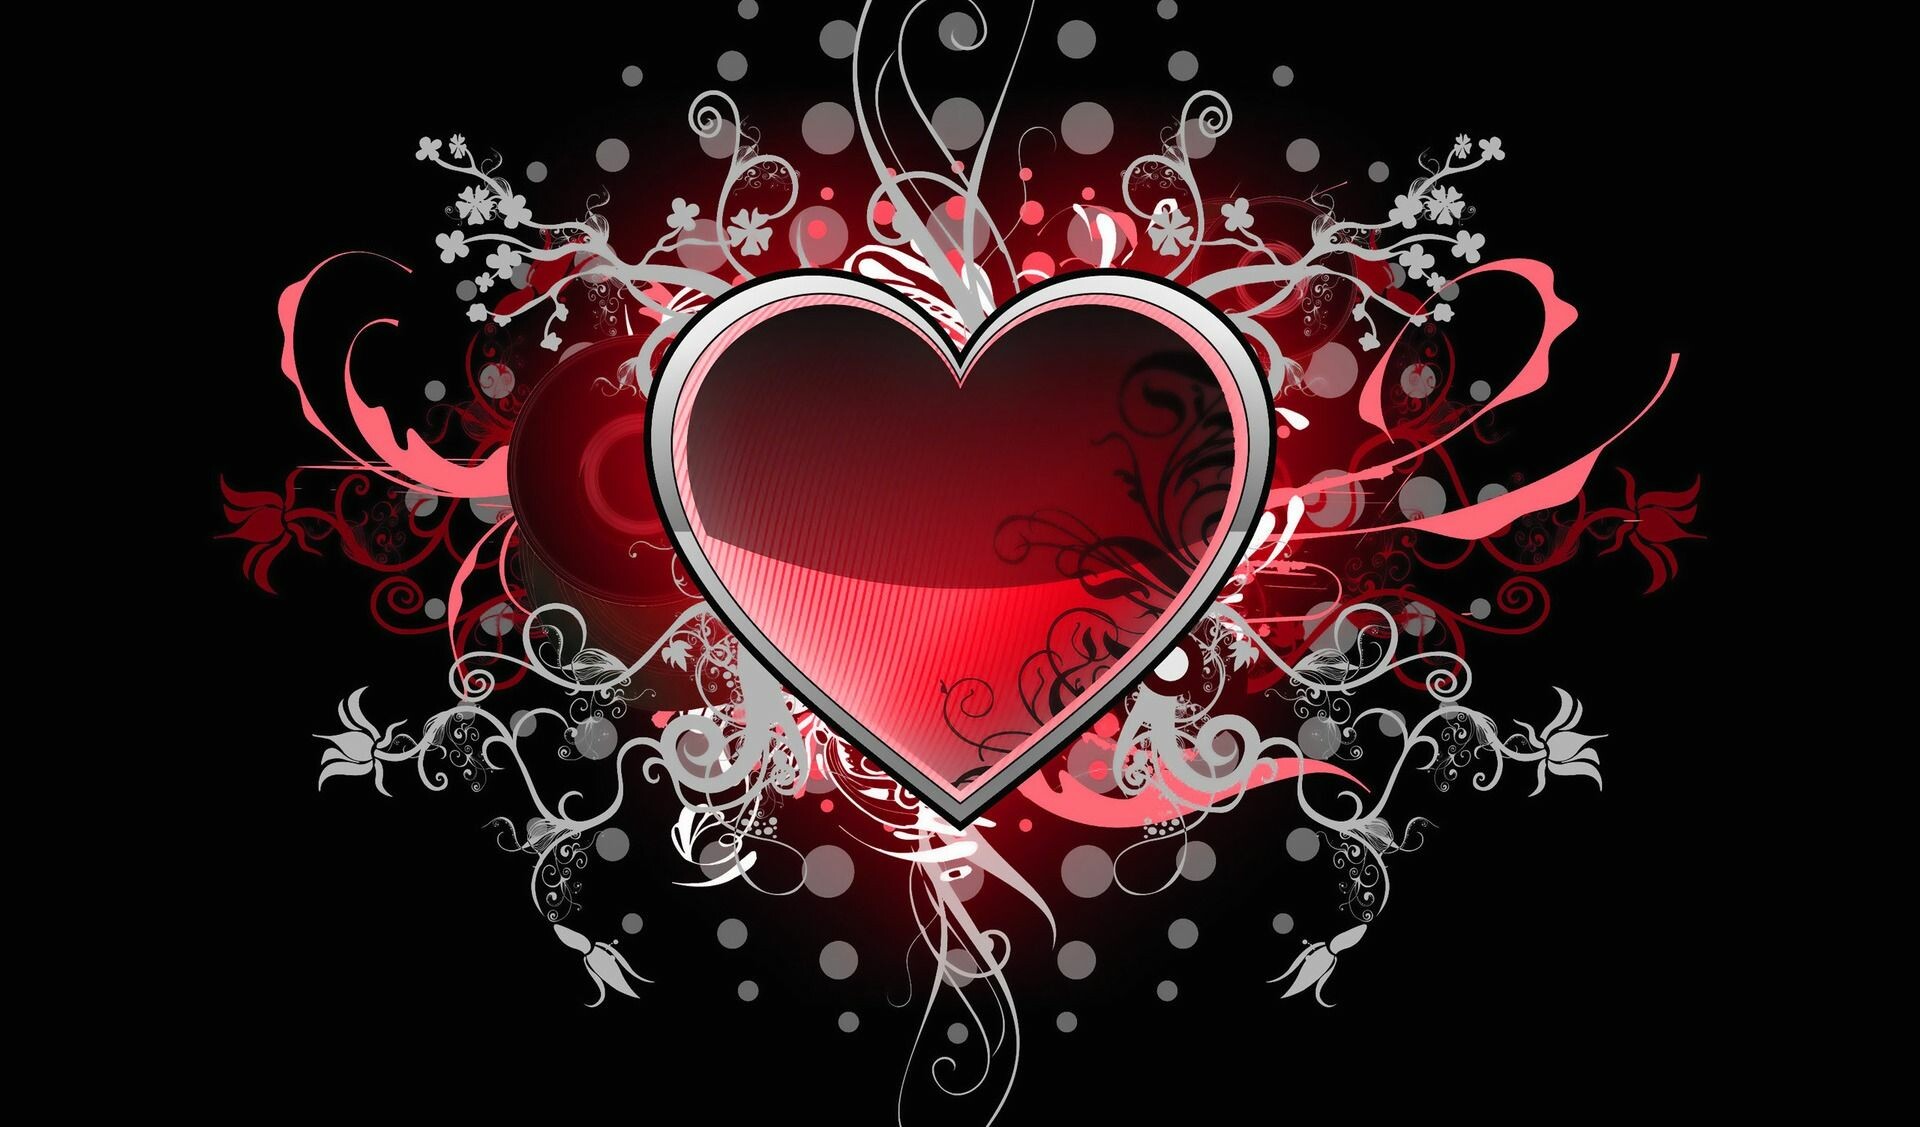 33 Free Valentines Day Wallpapers and Backgrounds  Picsart Blog